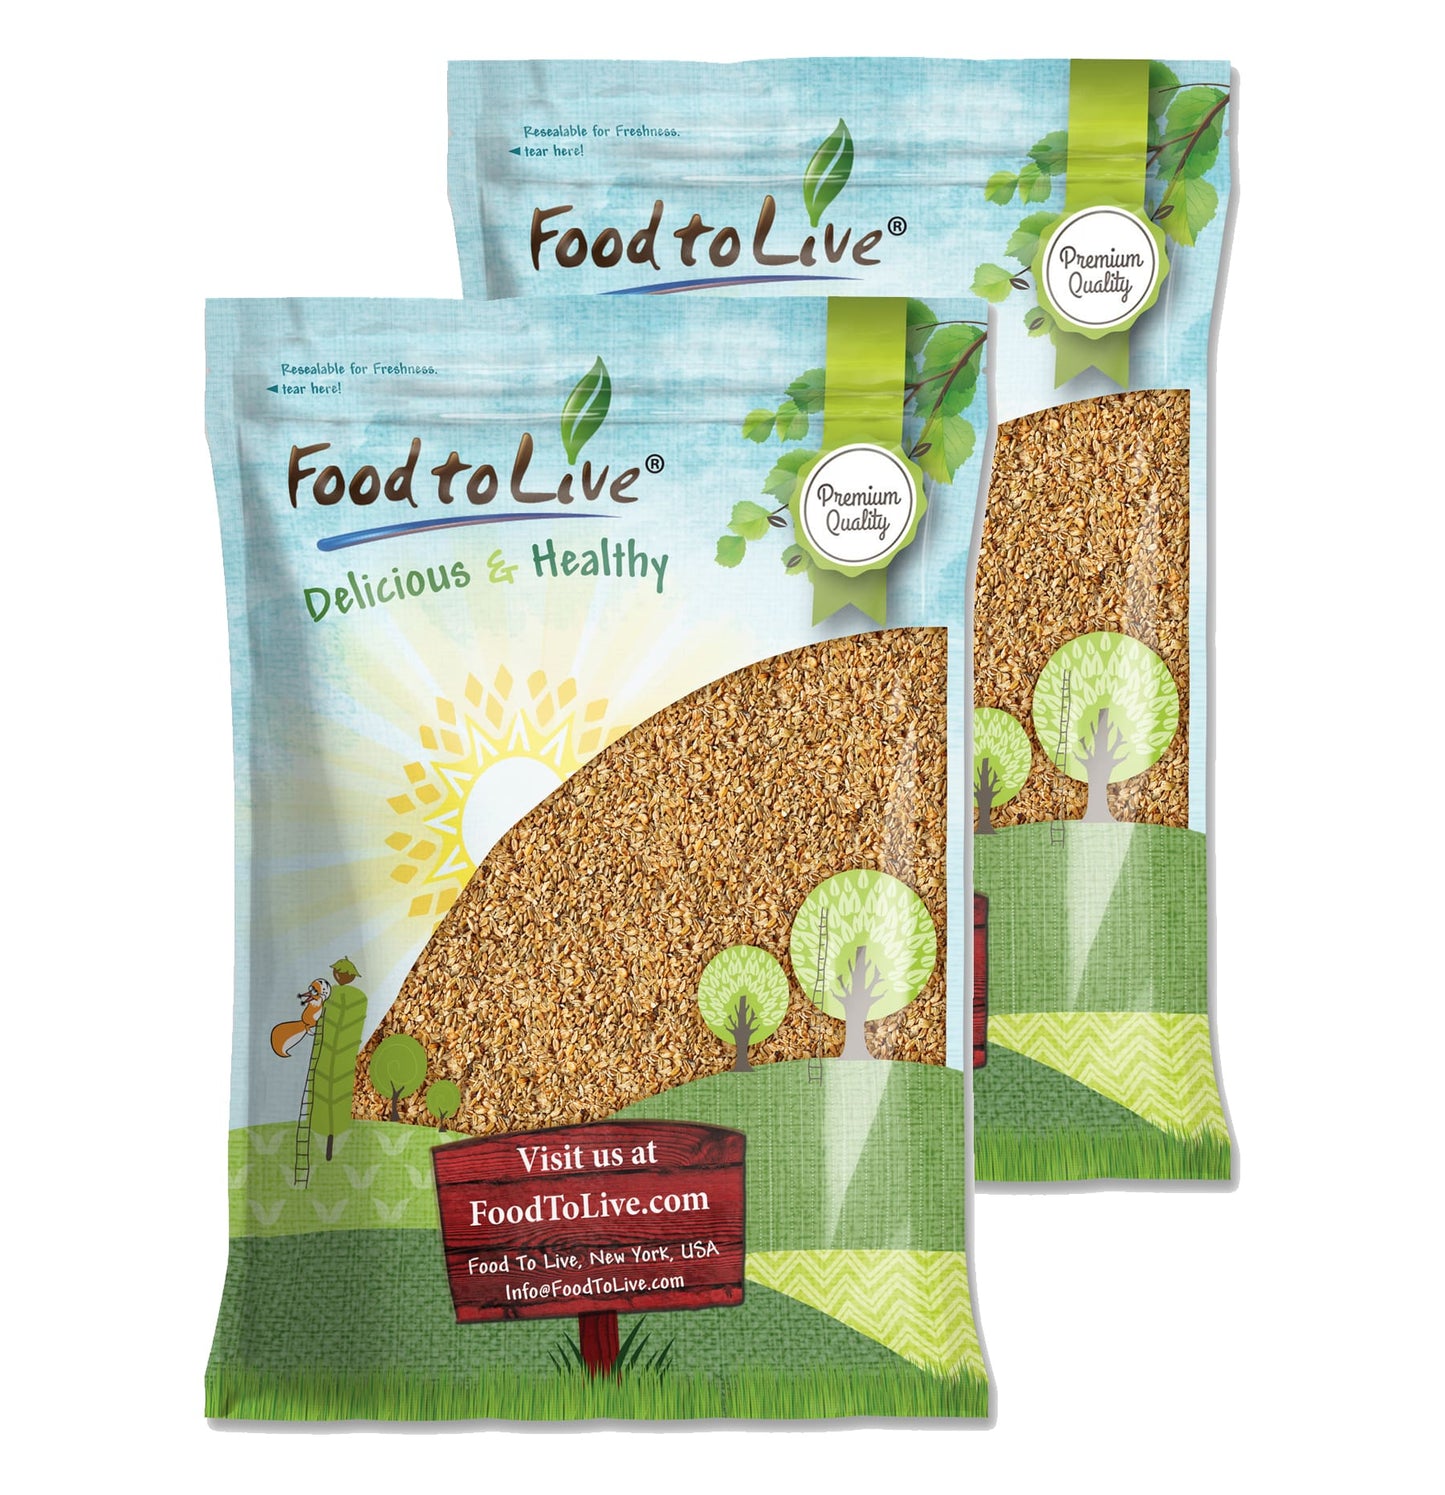 Whole Freekeh — Non-GMO Verified, Whole Grain, Vegan, Roasted Green Wheat, Healthy Ancient Supergrain Farik, Rich in Protein, Bulk - by Food to Live